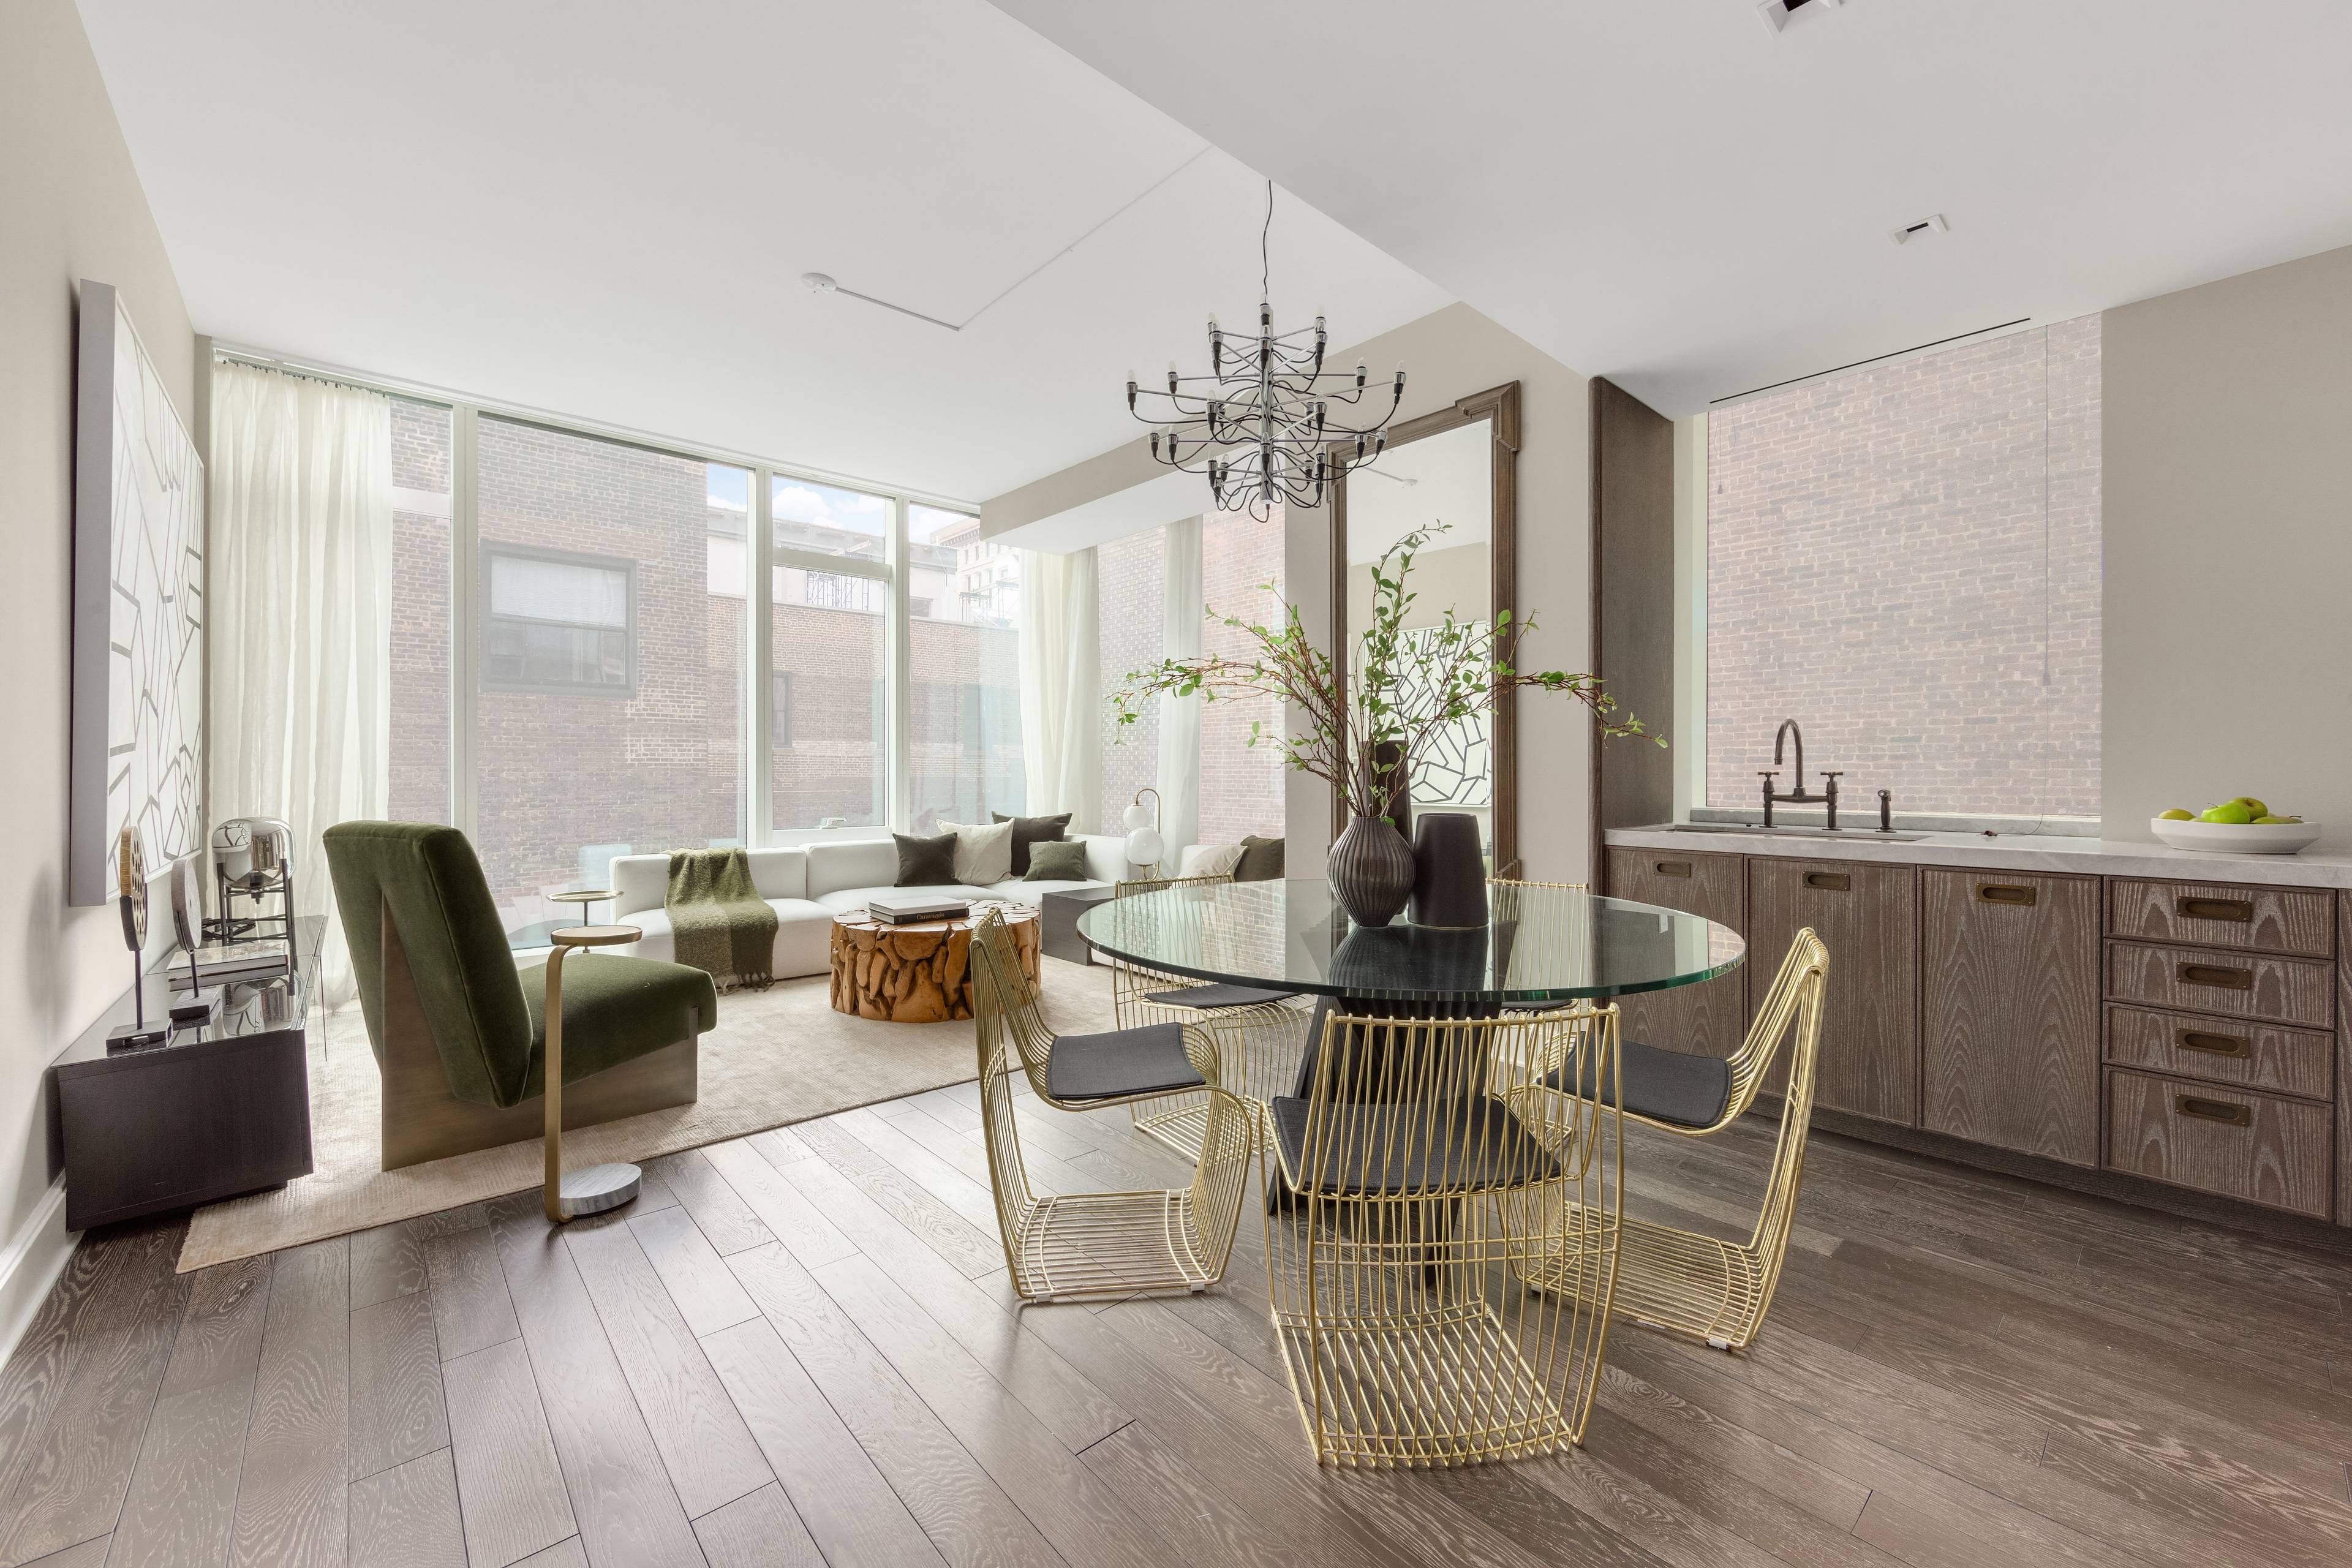 Surround yourself in unrivaled luxury and style in this high floor one bedroom, one bathroom showplace in the Flatiron District's revered Madison Square Park Tower.